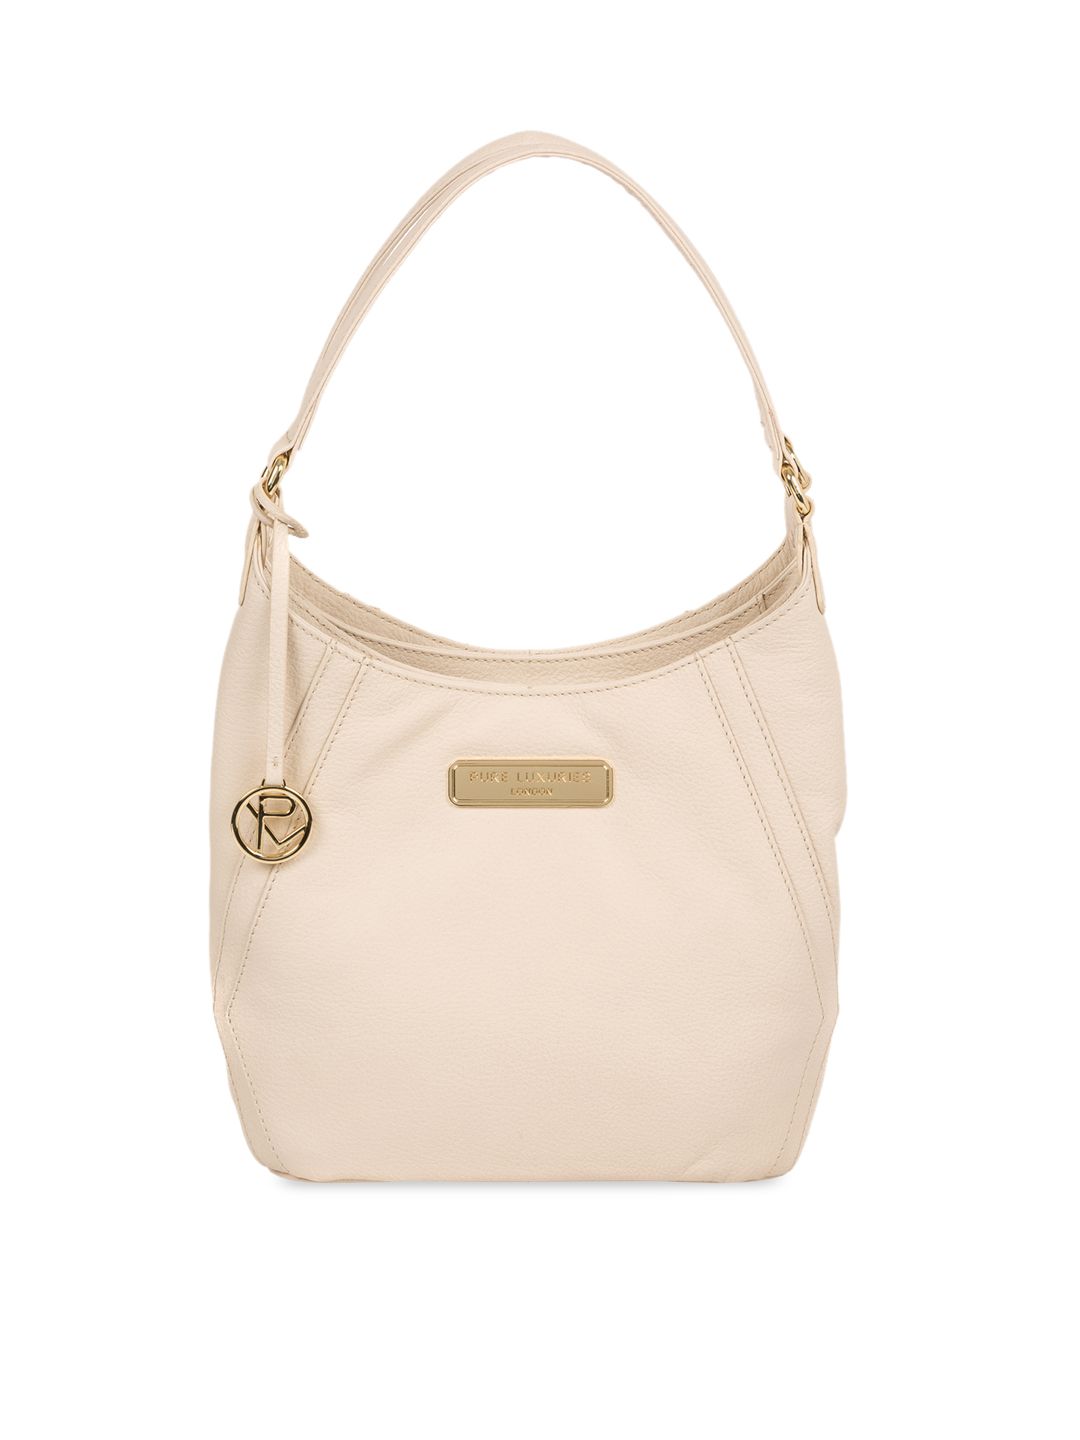 PURE LUXURIES LONDON Women Cream Coloured Solid Genuine Leather Abigail Tote Bag Price in India